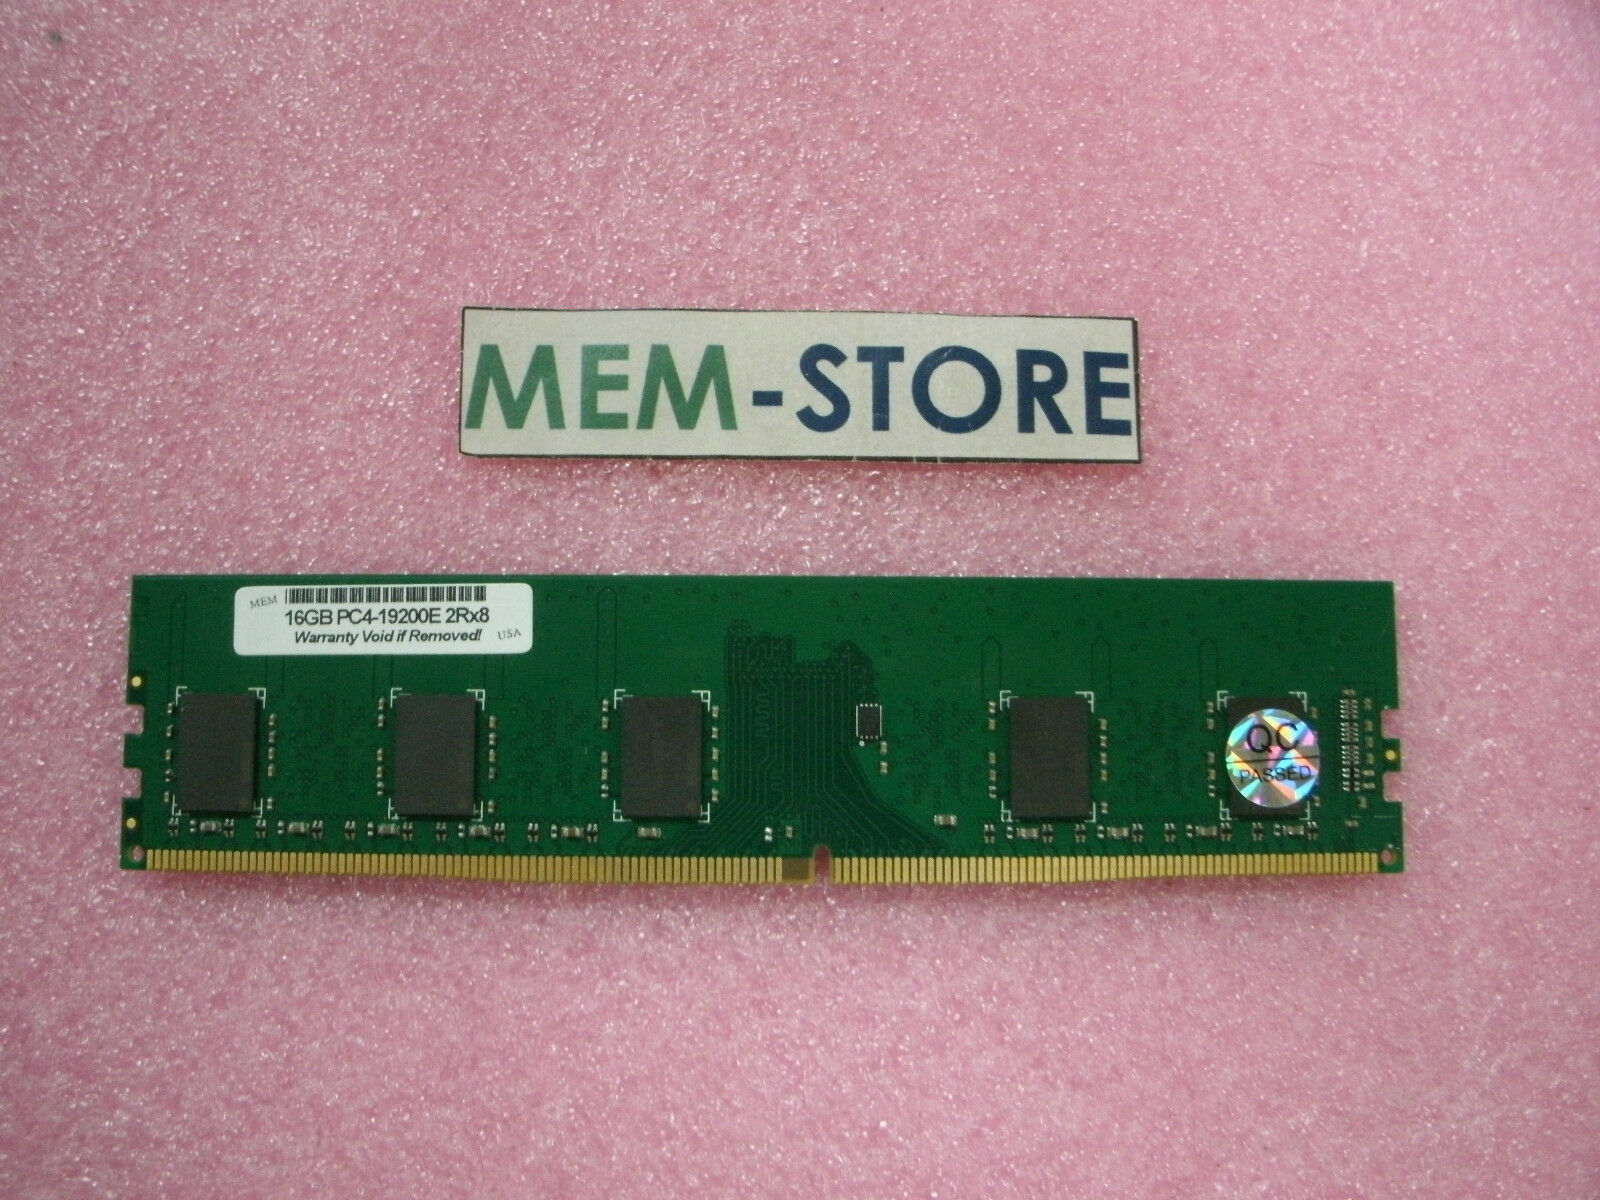 4X70G88334 Lenovo Compatible 16GB DDR4 2400MHz ECC UDIMM RAM Memory for ThinkServer RS160 (3rd Party) - image 2 of 3